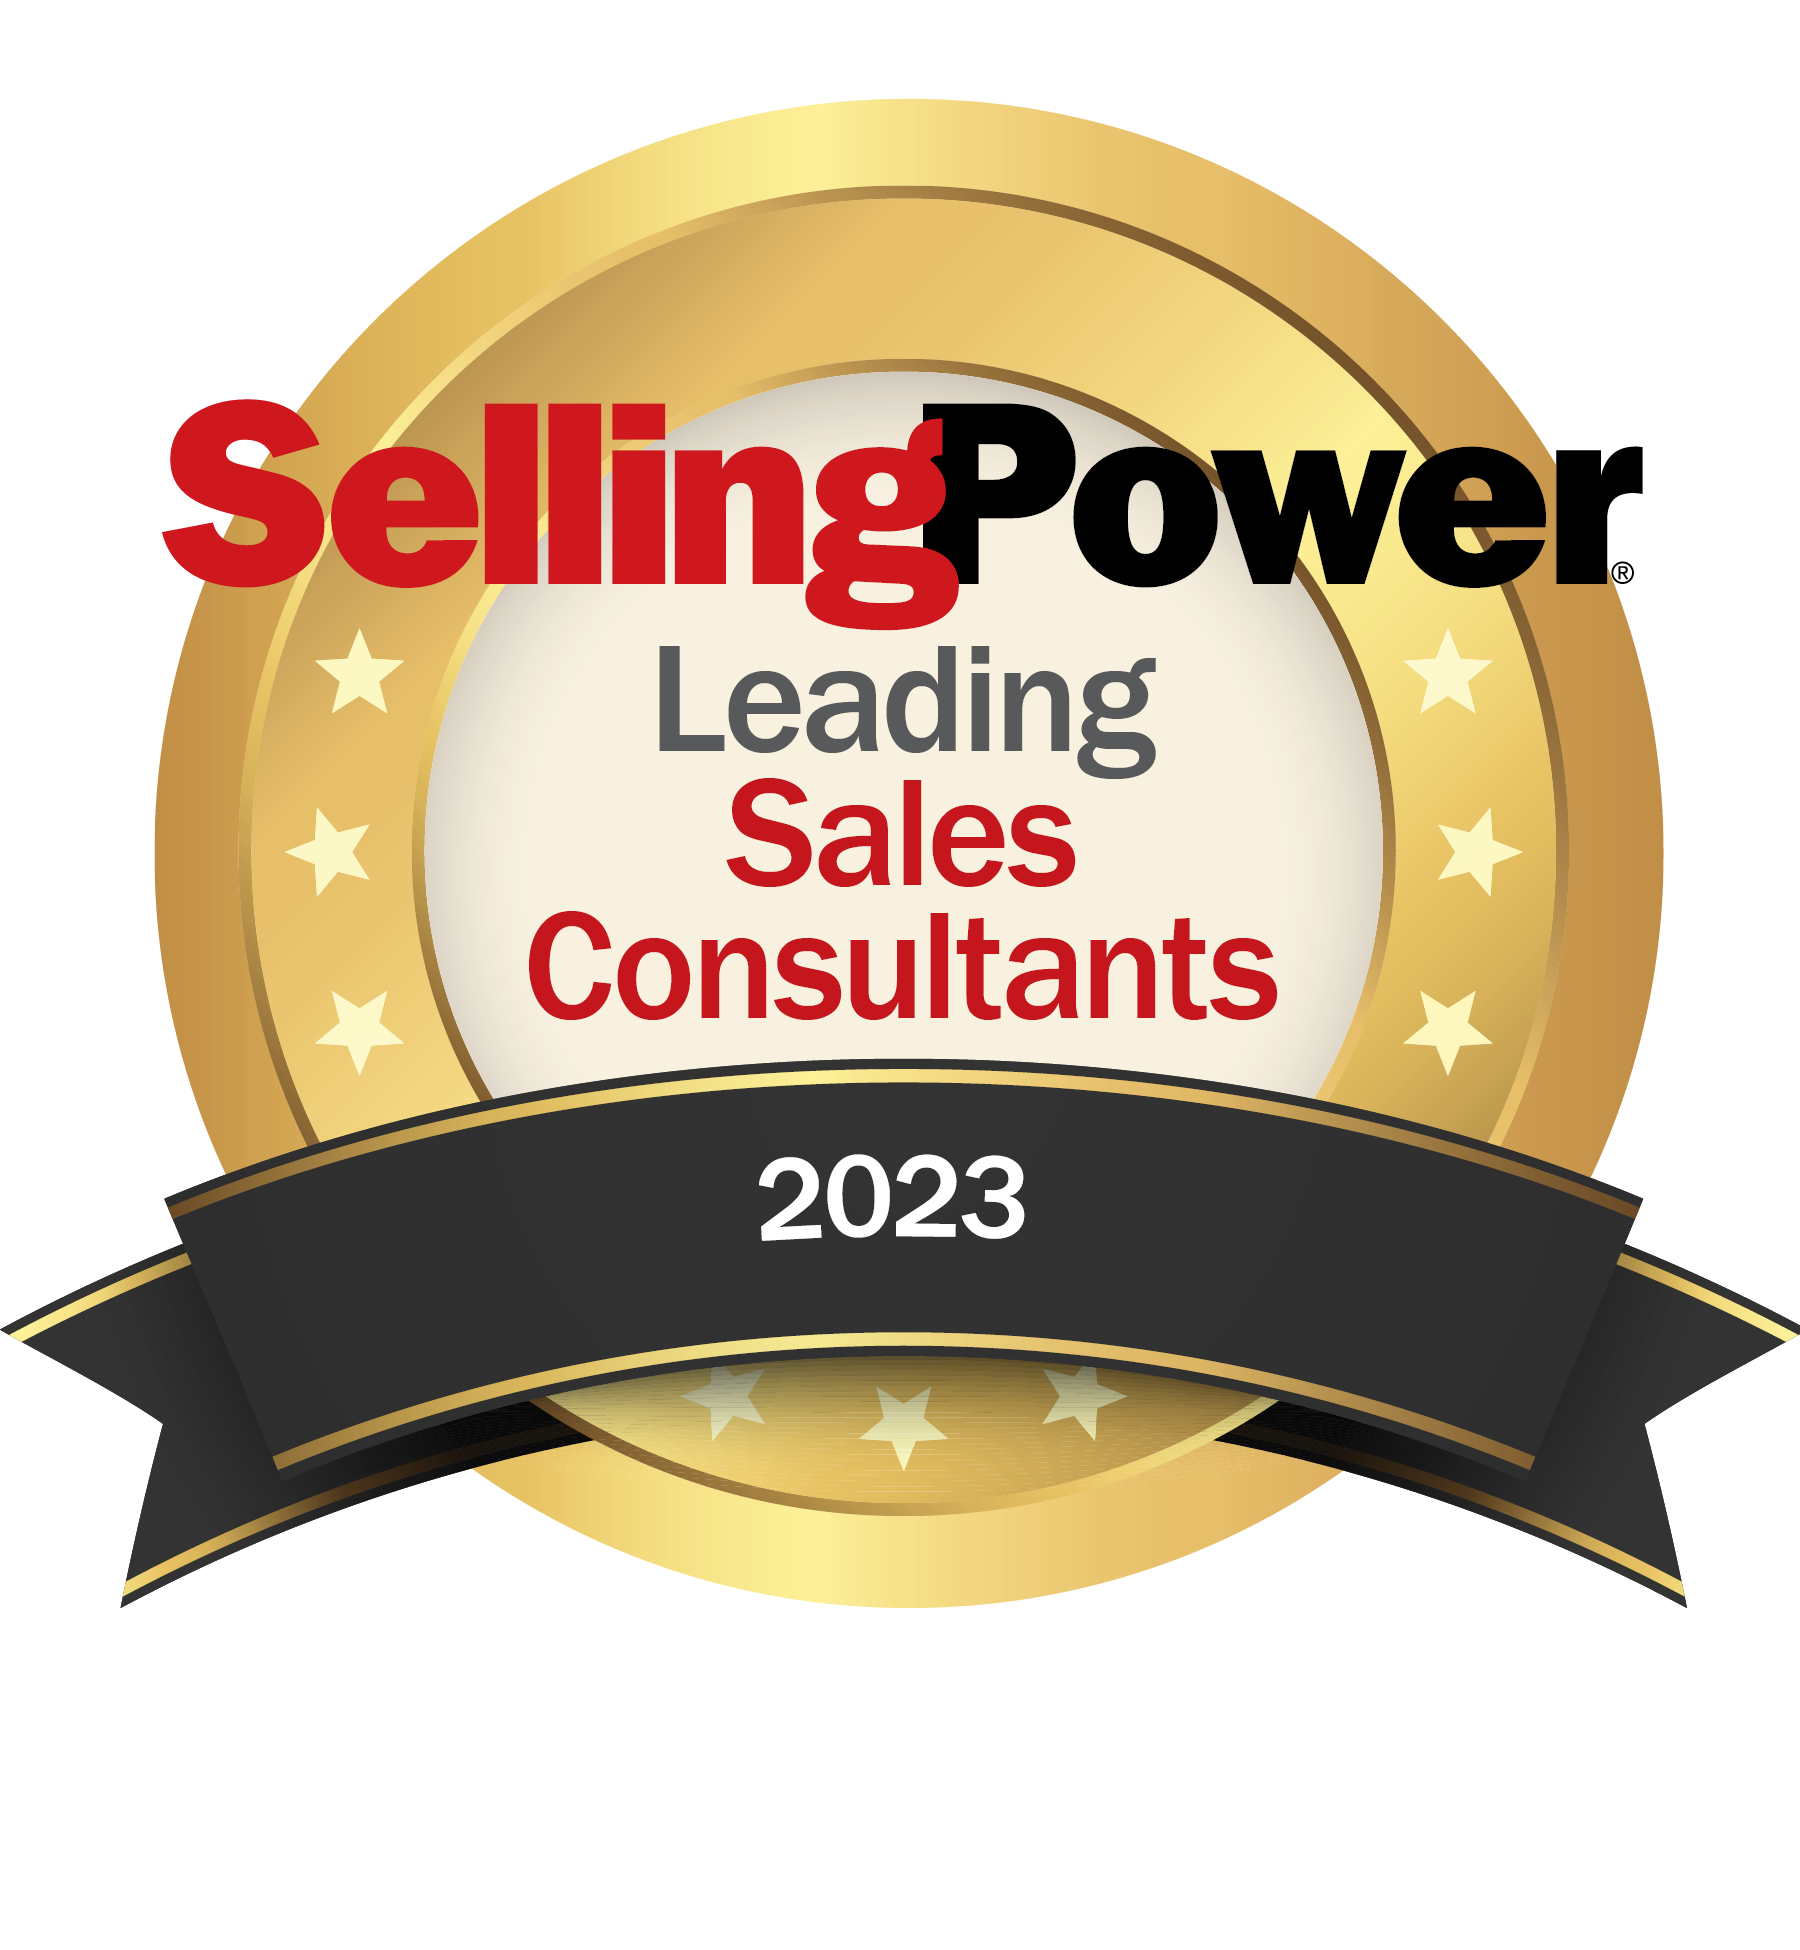 Logo for Selling Power 2023 Leading Sales Consultants